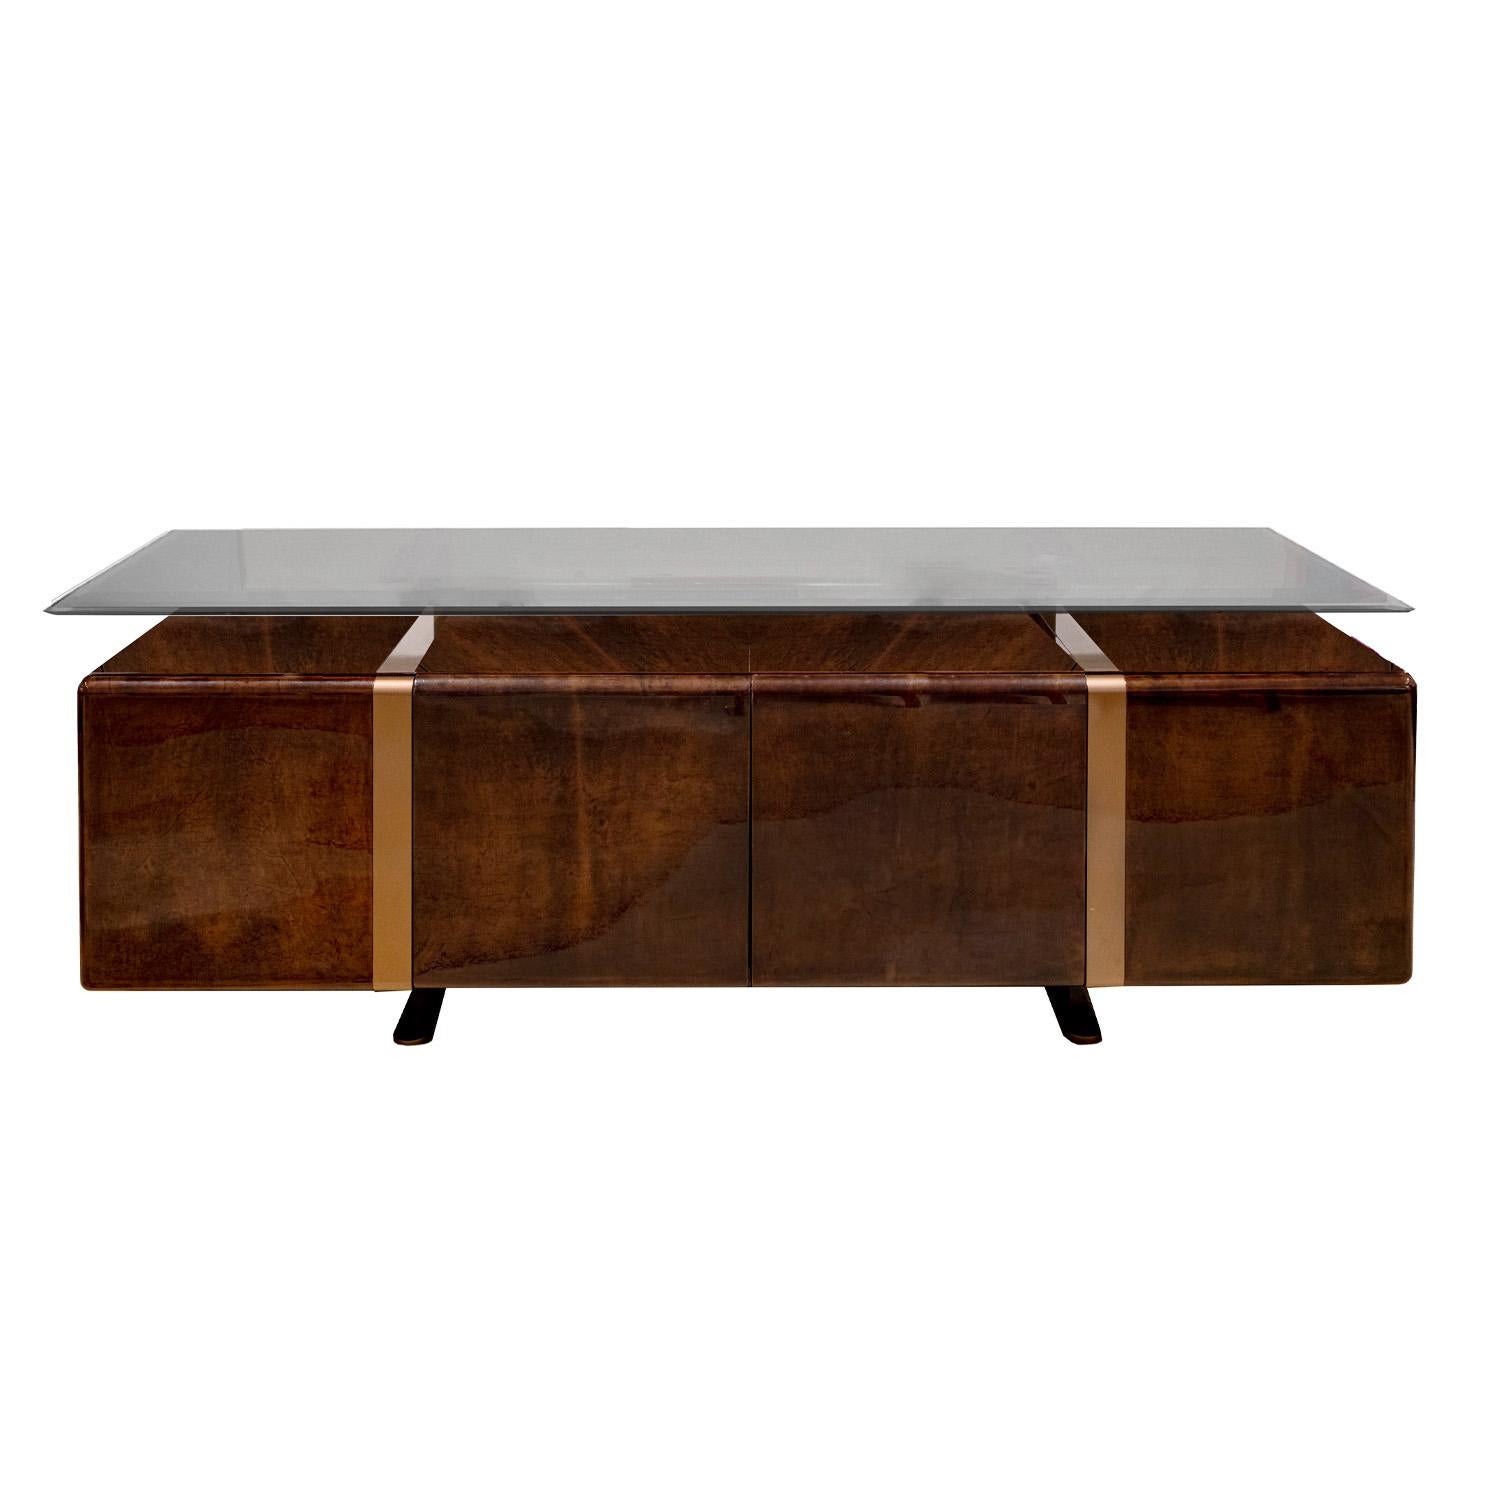 Impressive and large credenza in luxurious lacquered dark brown goatskin and bronze with floating bronze glass top by Saporiti, Italian 1980's. The craftsmanship of this piece is superb. The floating glass top makes it perfect as a server.